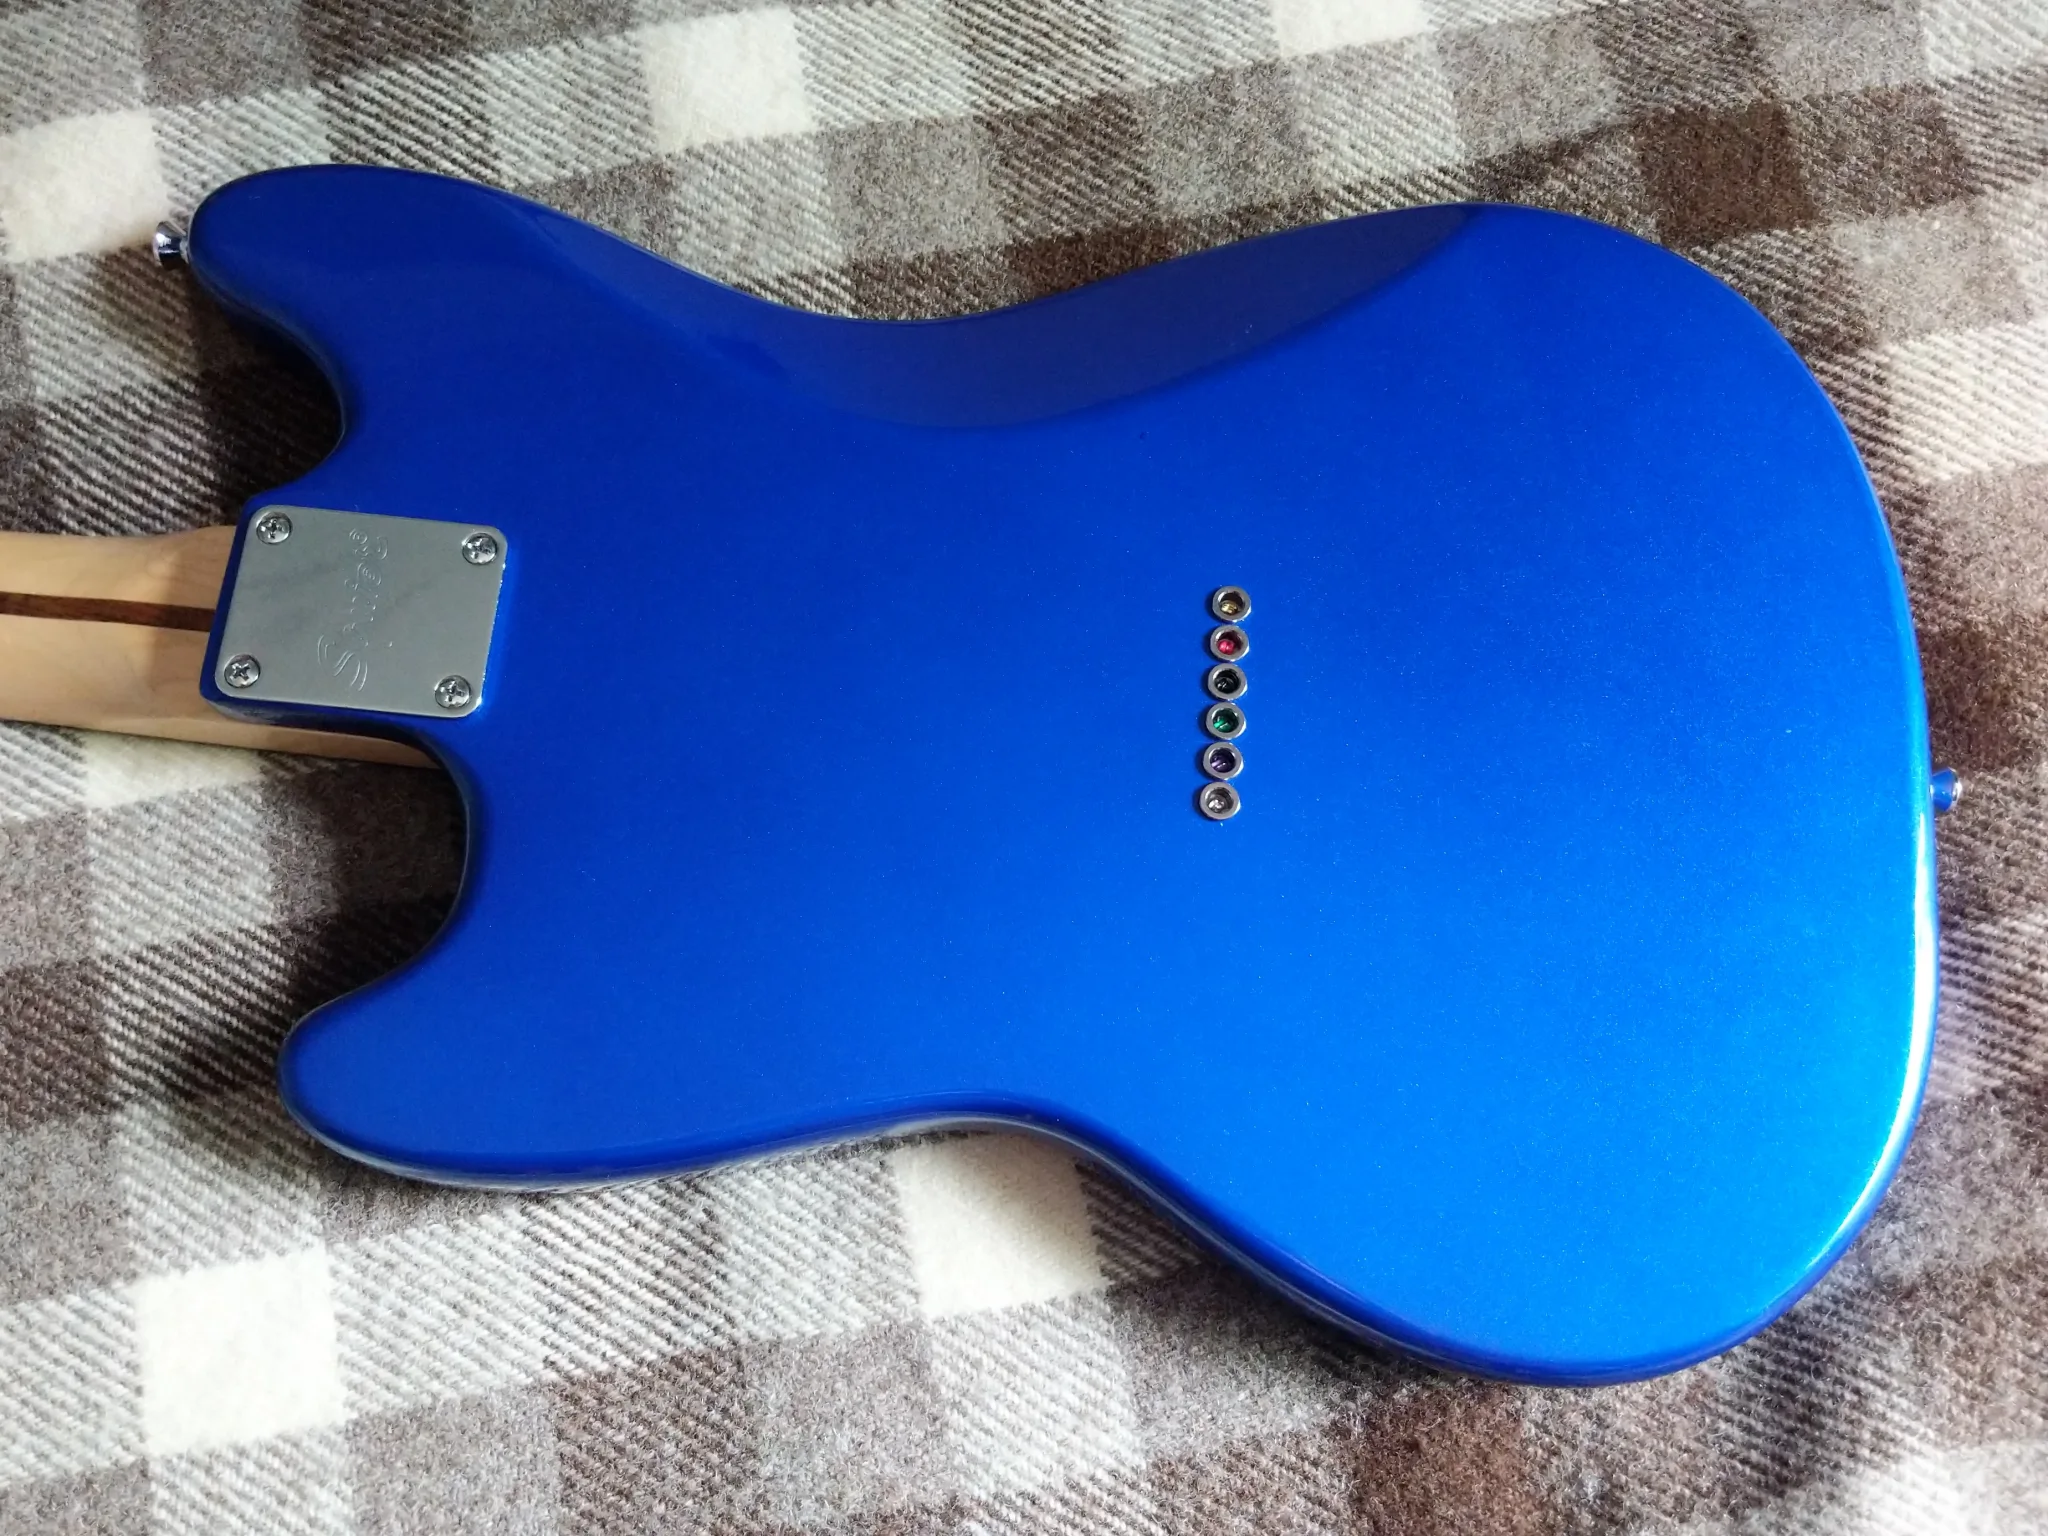 The rear of the guitar, with six string ferrules in a nice straight view